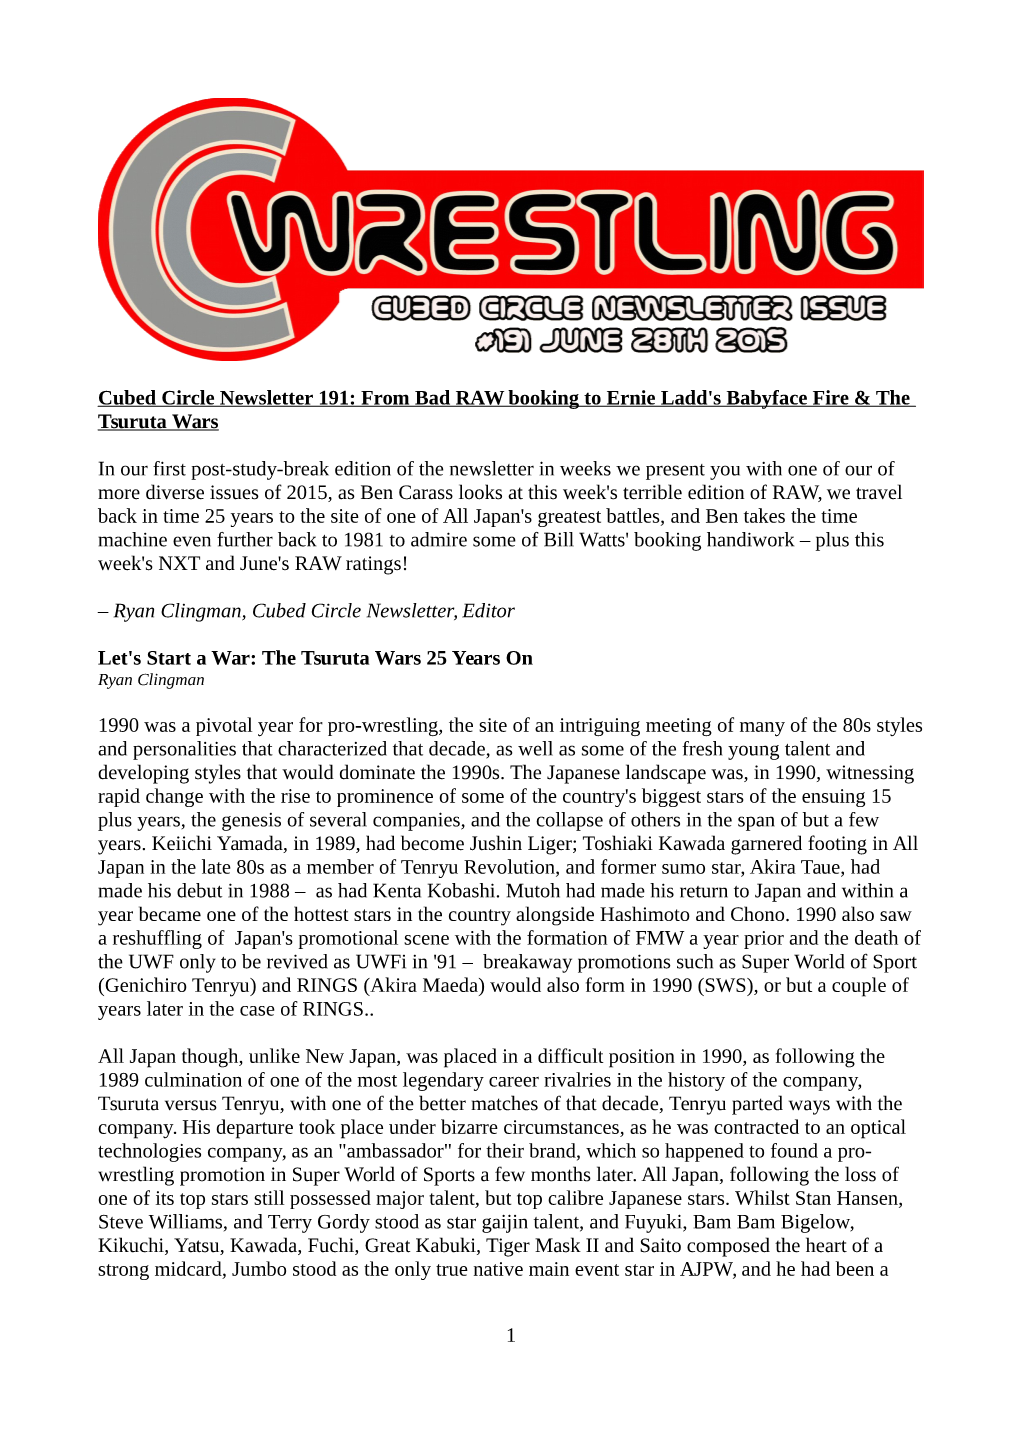 Cubed Circle Newsletter 191: from Bad RAW Booking to Ernie Ladd's Babyface Fire & the Tsuruta Wars